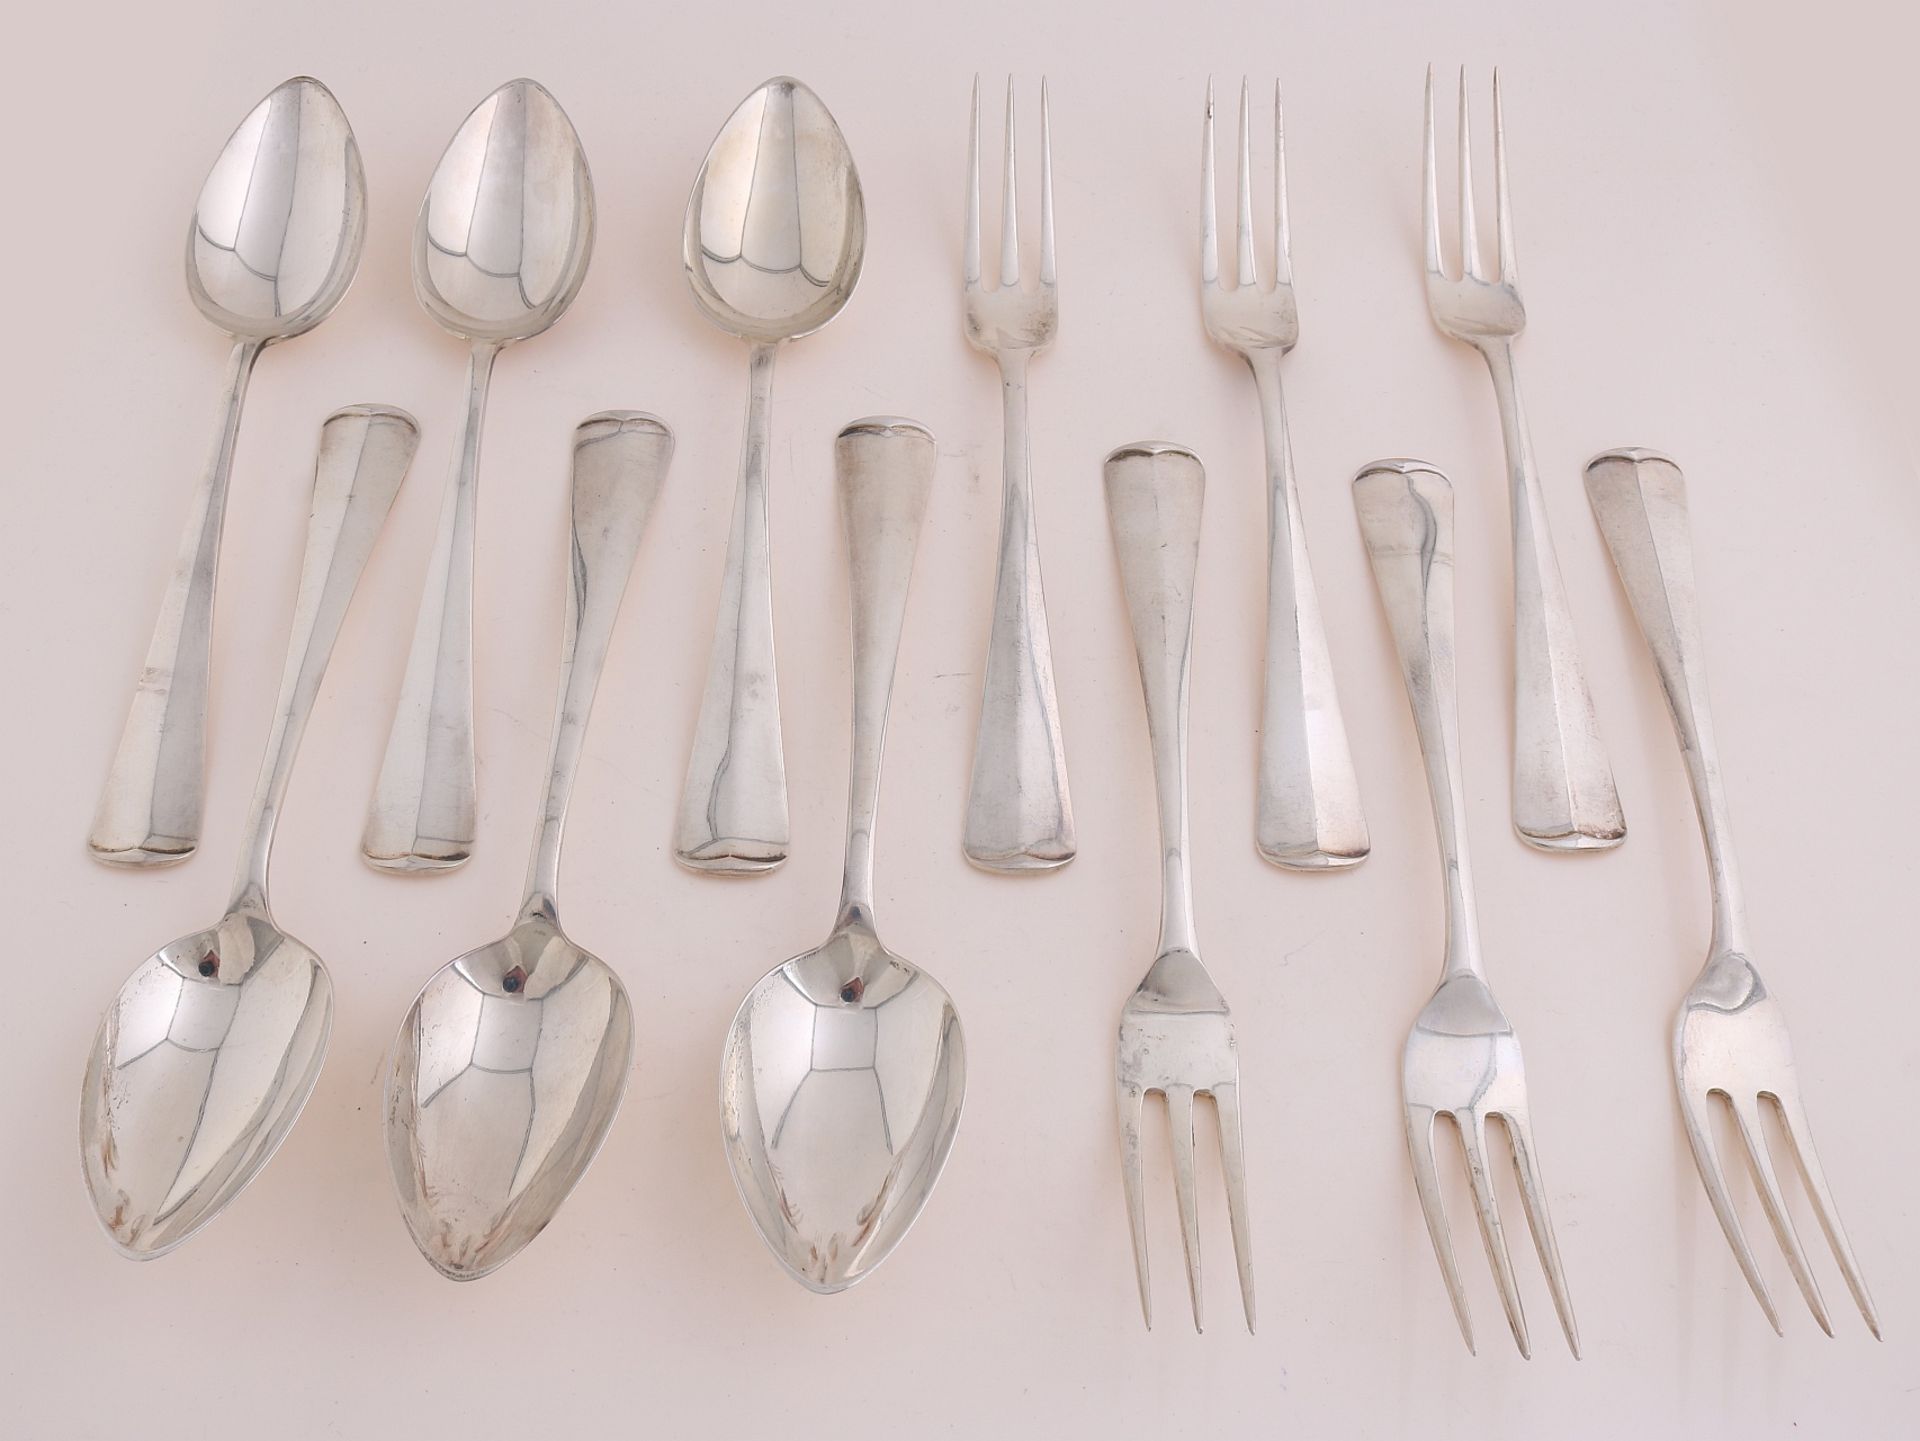 6 silver spoons and 6 forks